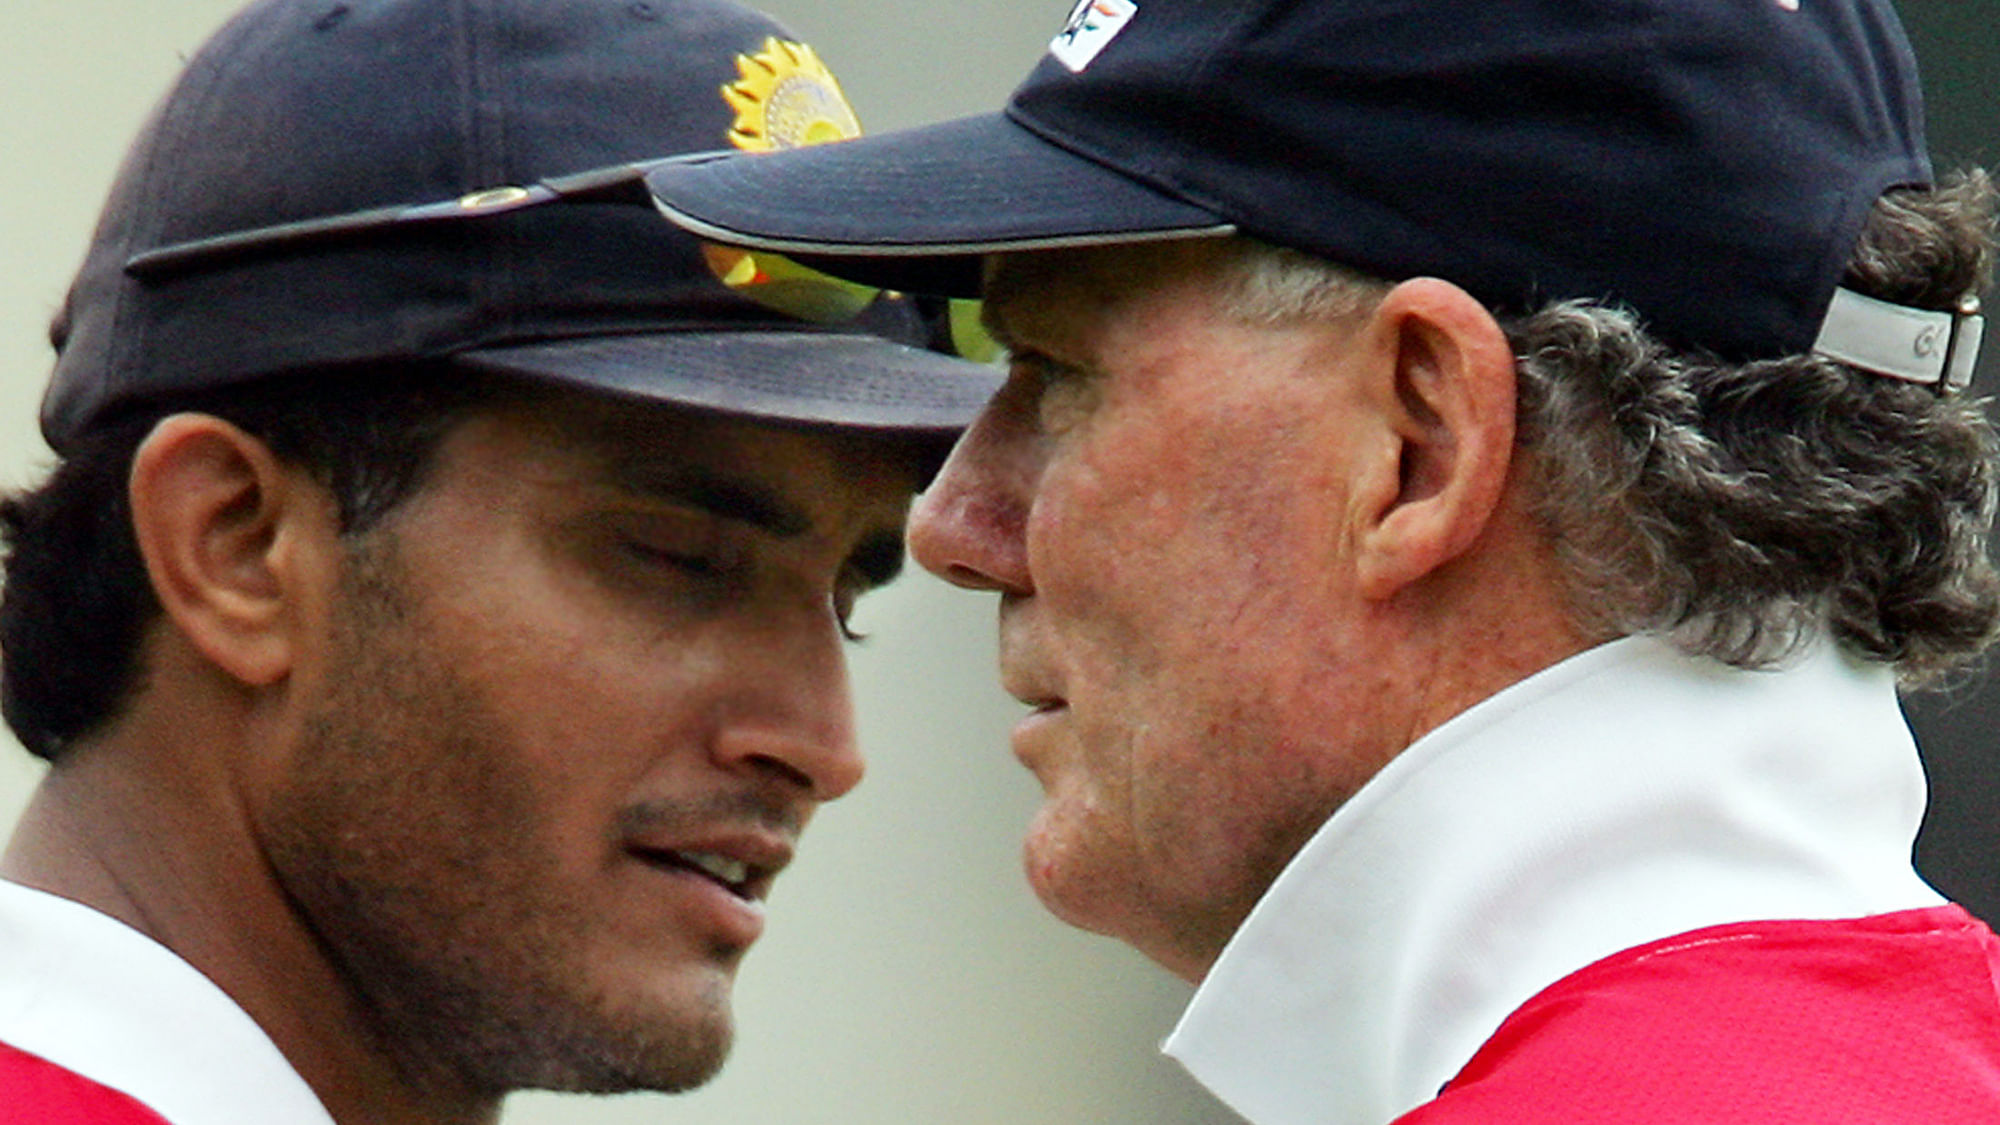 File picture of Sourav Ganguly and Greg Chappell during a training session in Chennai on December 1, 2005.